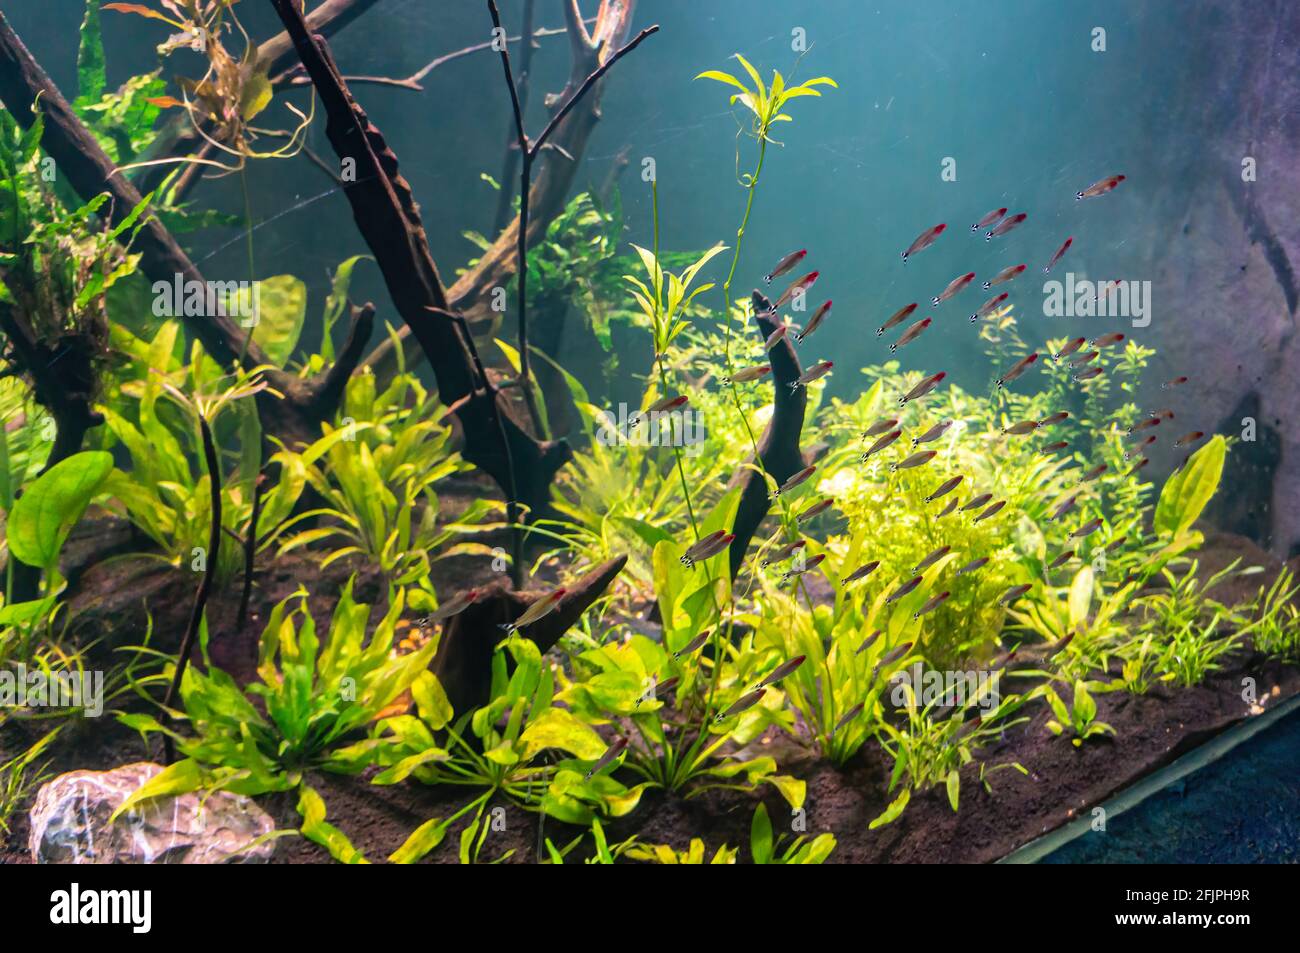 A shoal of Firehead tetra (Hemigrammus bleheri - species of characin found in Amazon Basin in Brazil and Peru) swimming in a water tank. Stock Photo